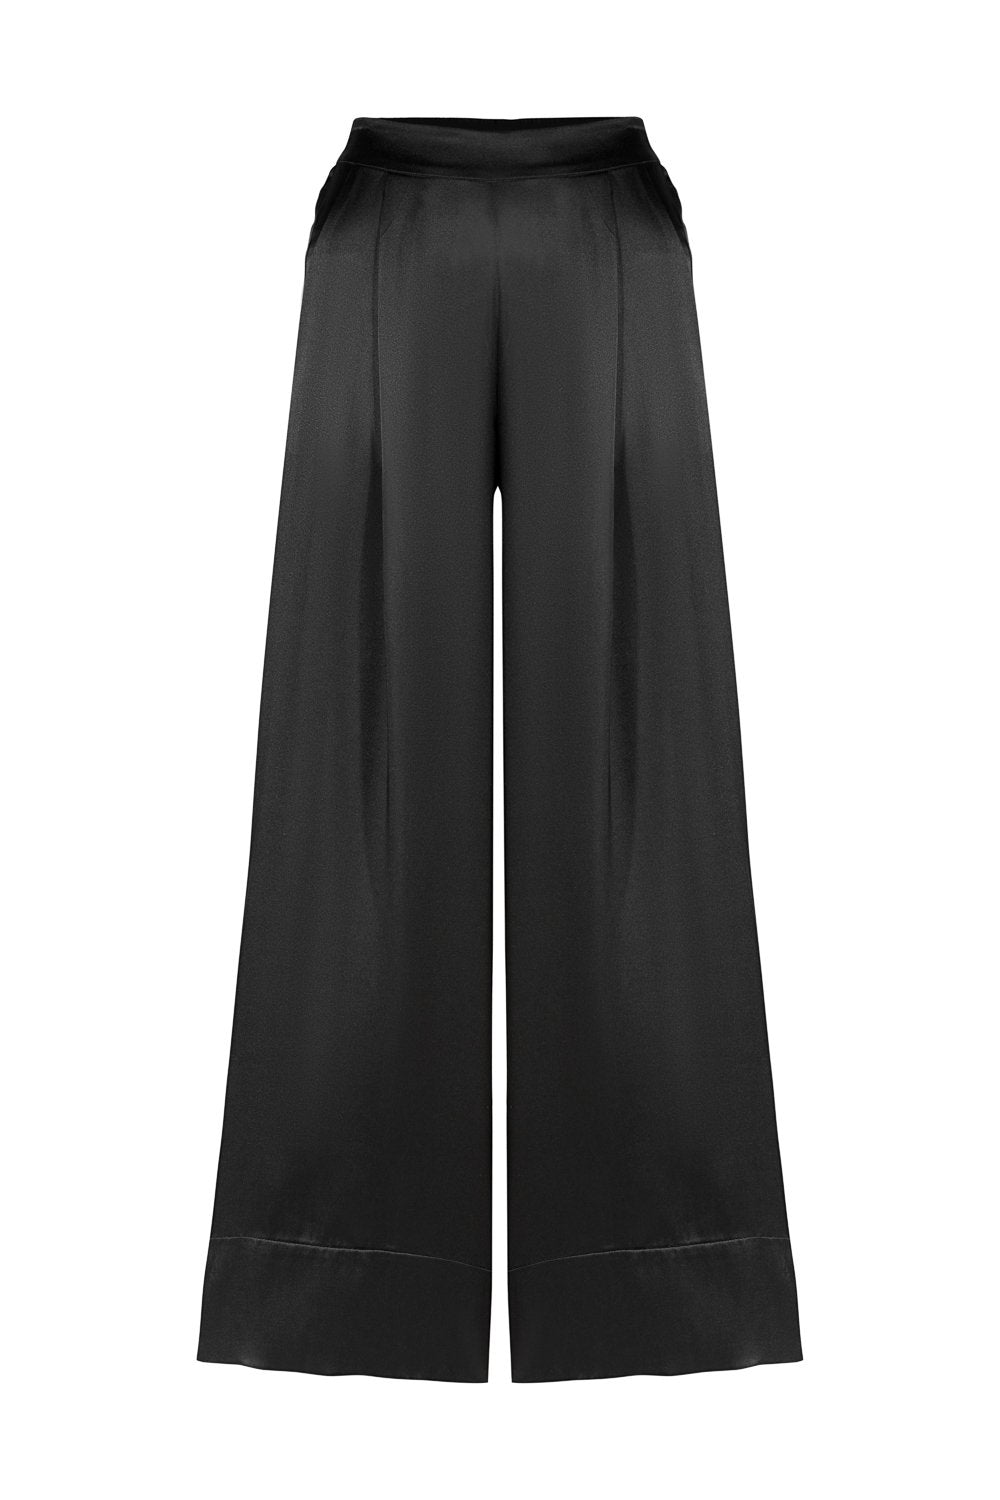 Palazzo Style Silk Pants in Black